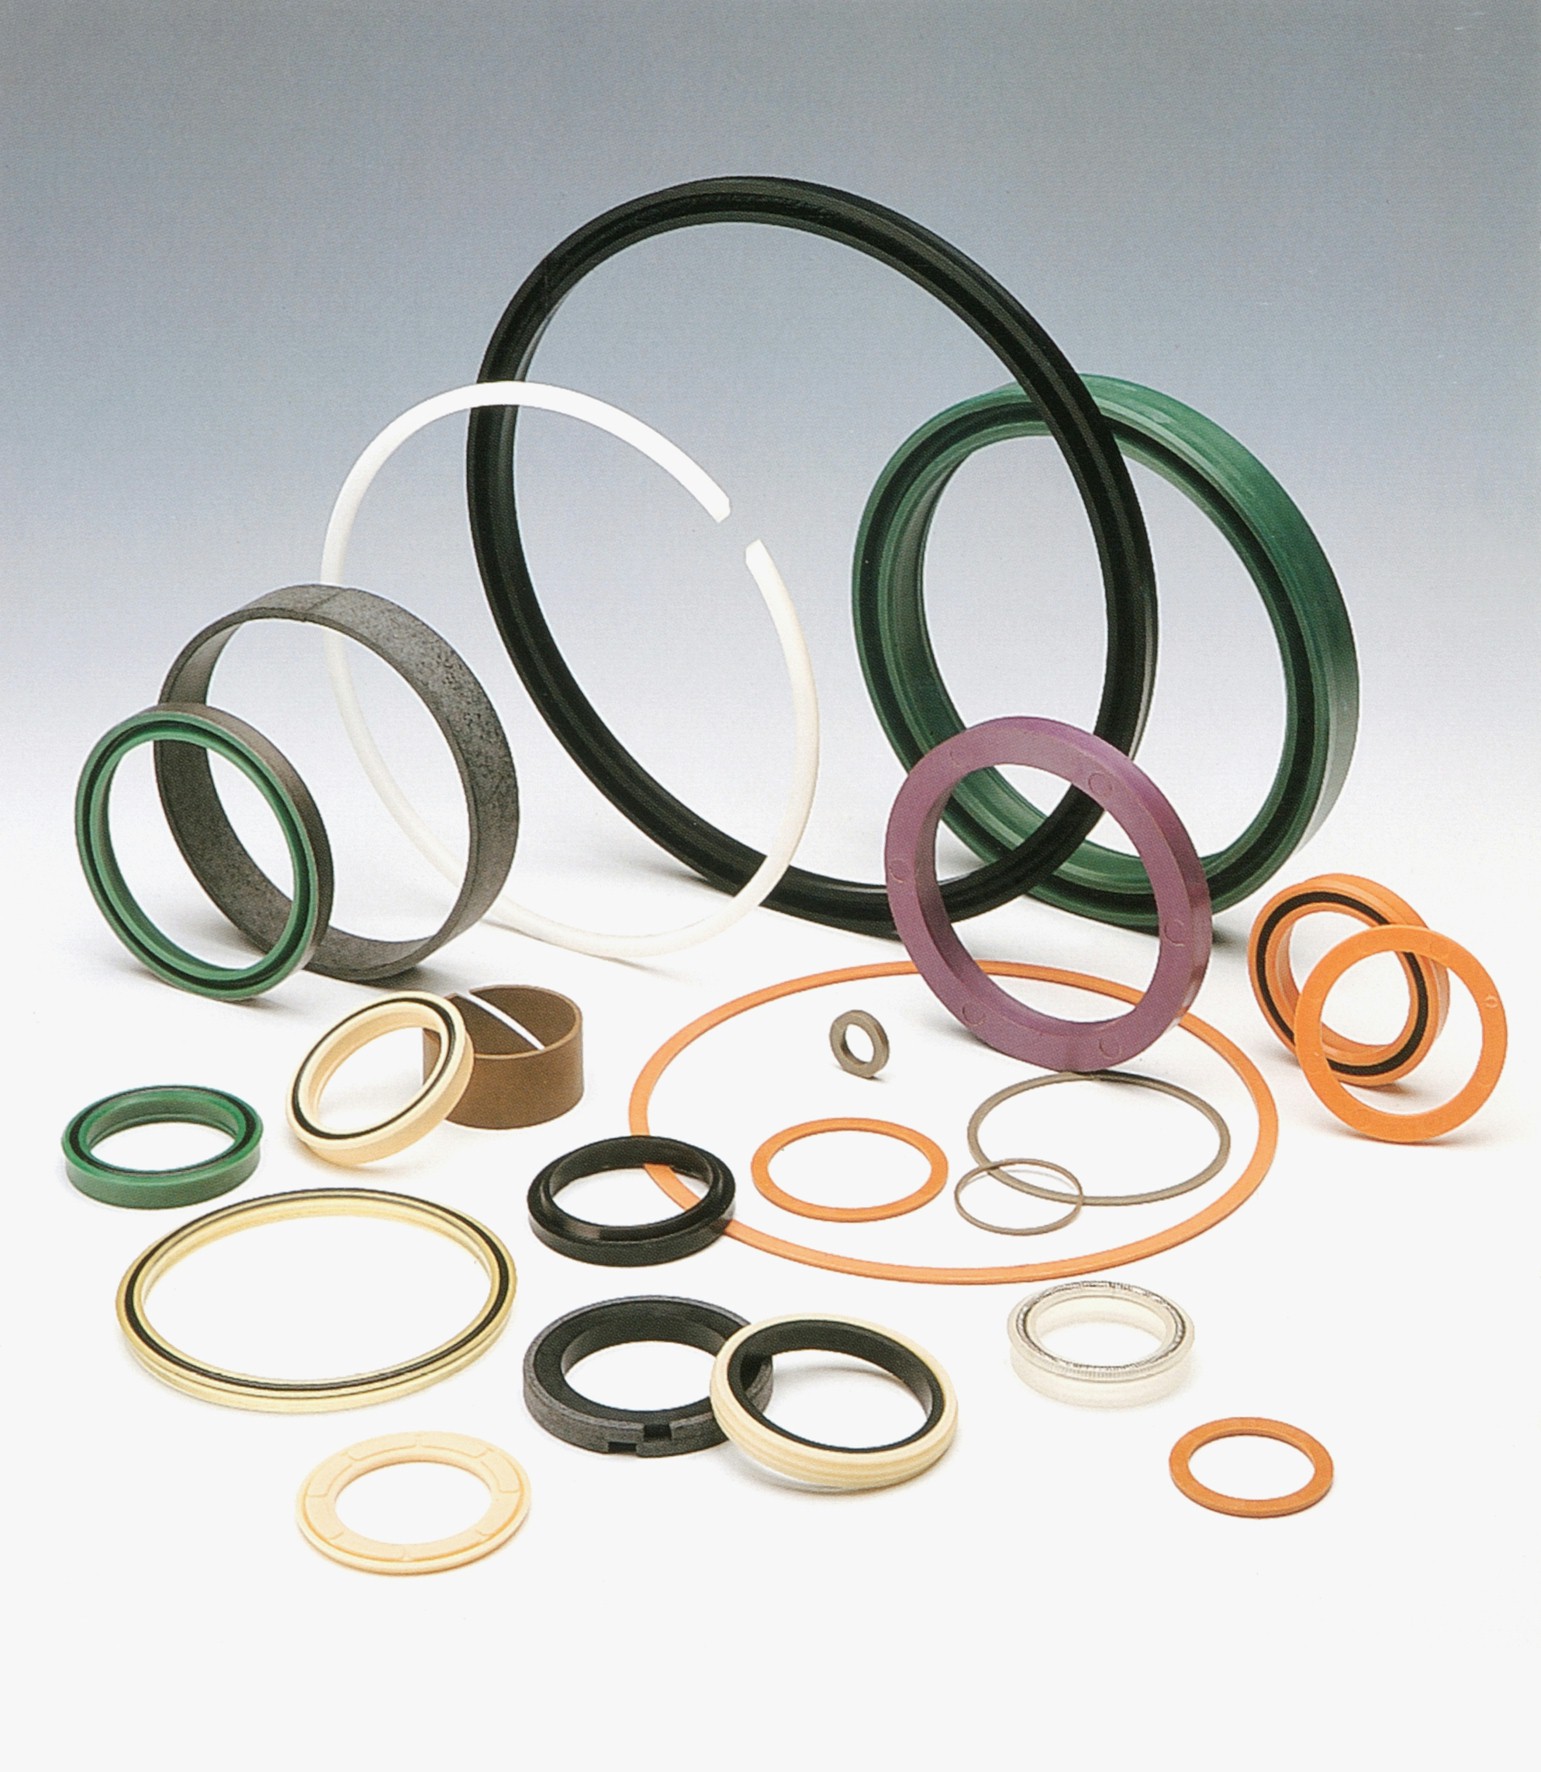 oil_seal_solution_group_photo